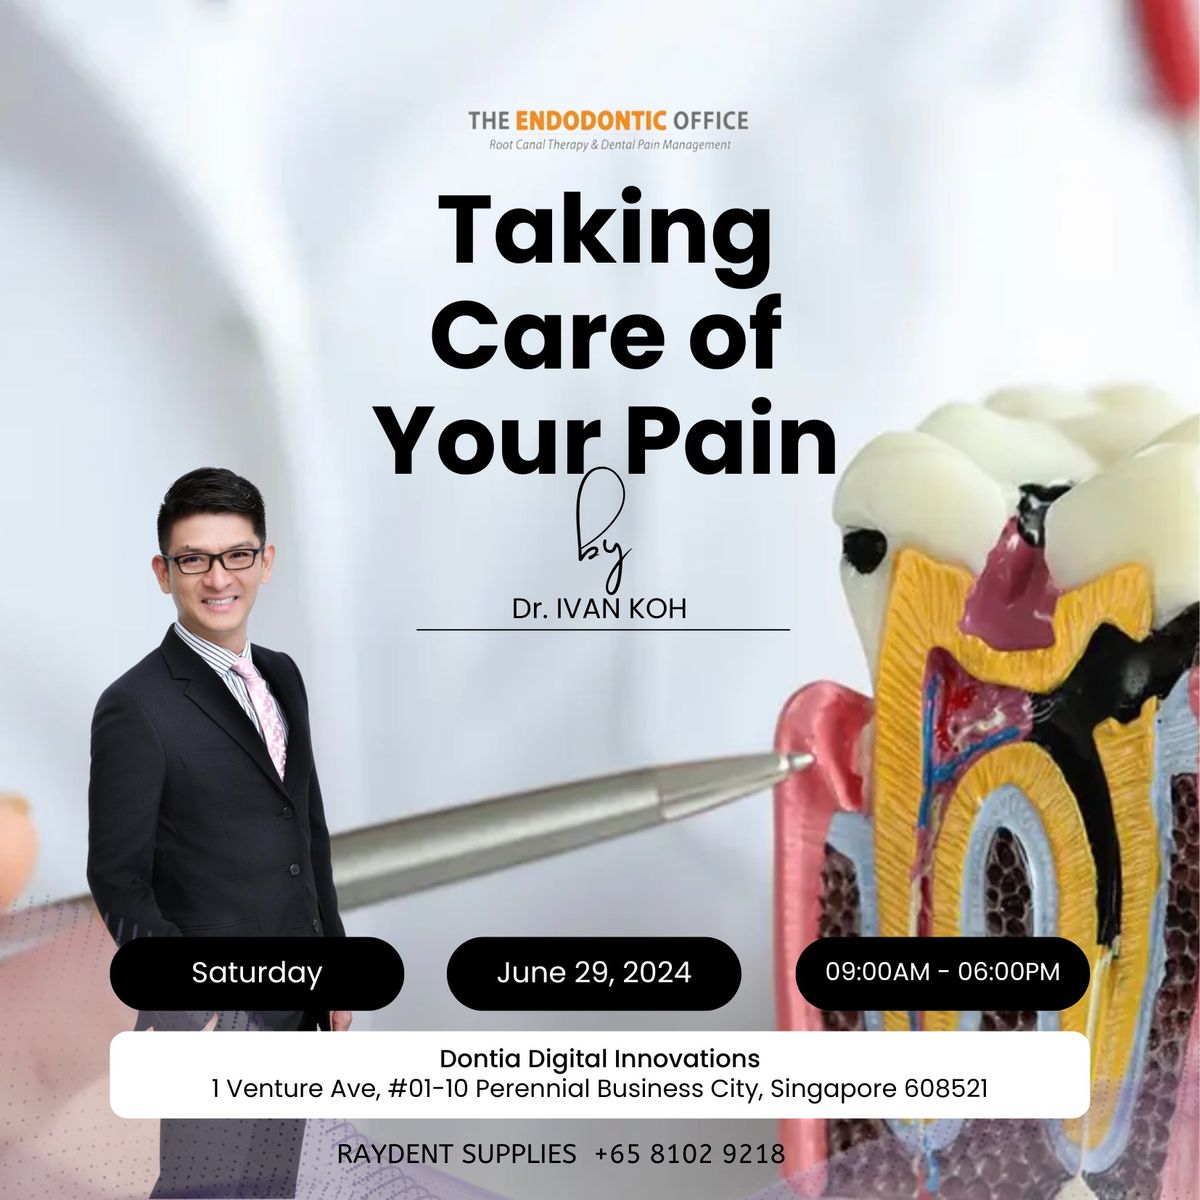 Endodontics for General Dentists: 'Taking Care of YOUR Pain' with Dr. Ivan Koh